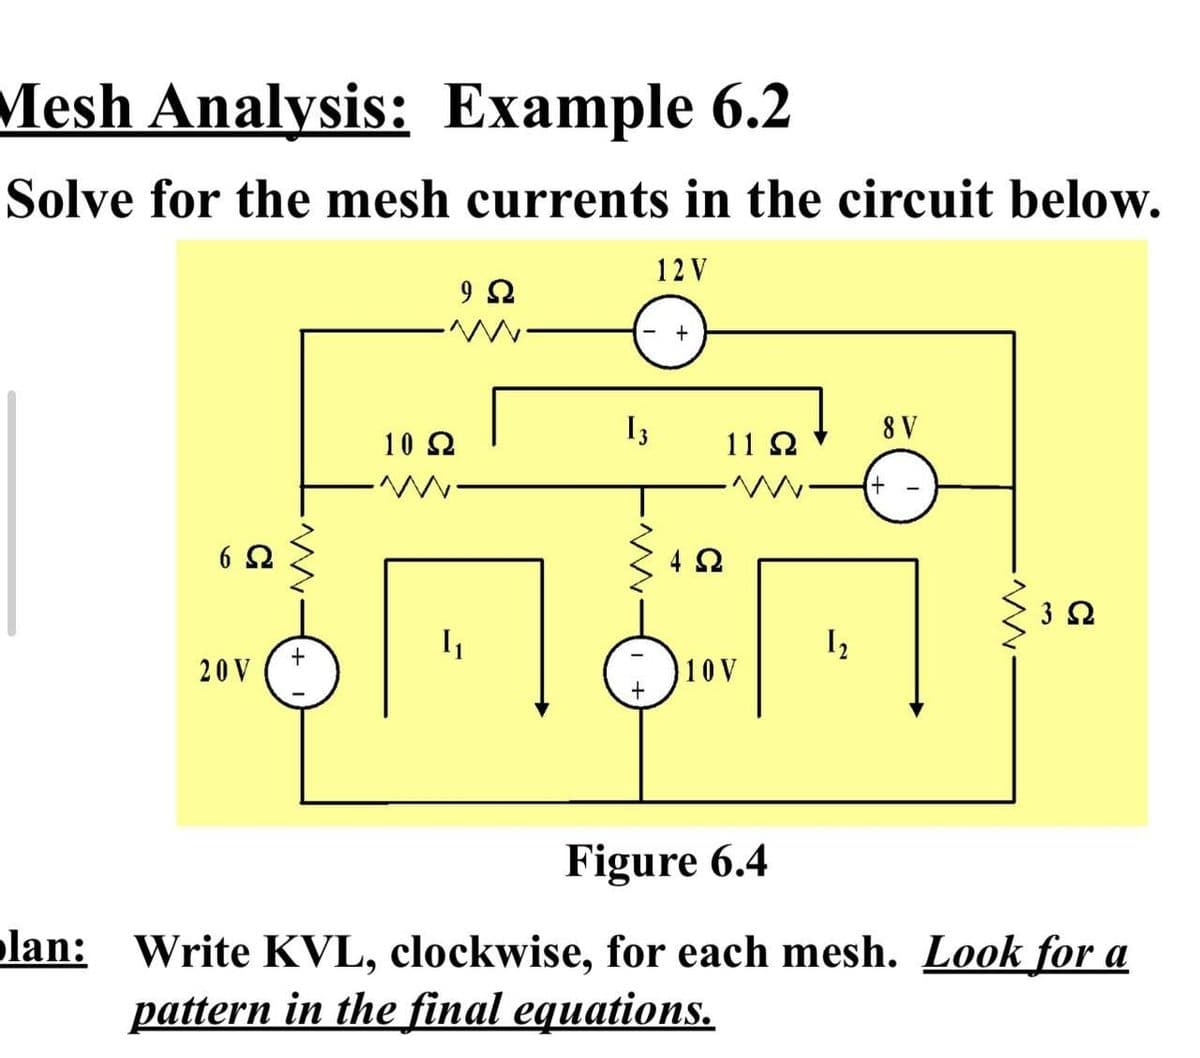 Mesh Analysis: Example 6.2
Solve for the mesh currents in the circuit below.
12 V
I3
8 V
10 2
11 2
6 2
4 2
3 2
+
20 V
10V
+
Figure 6.4
olan: Write KVL, clockwise, for each mesh. Look for a
pattern in the final equations.
